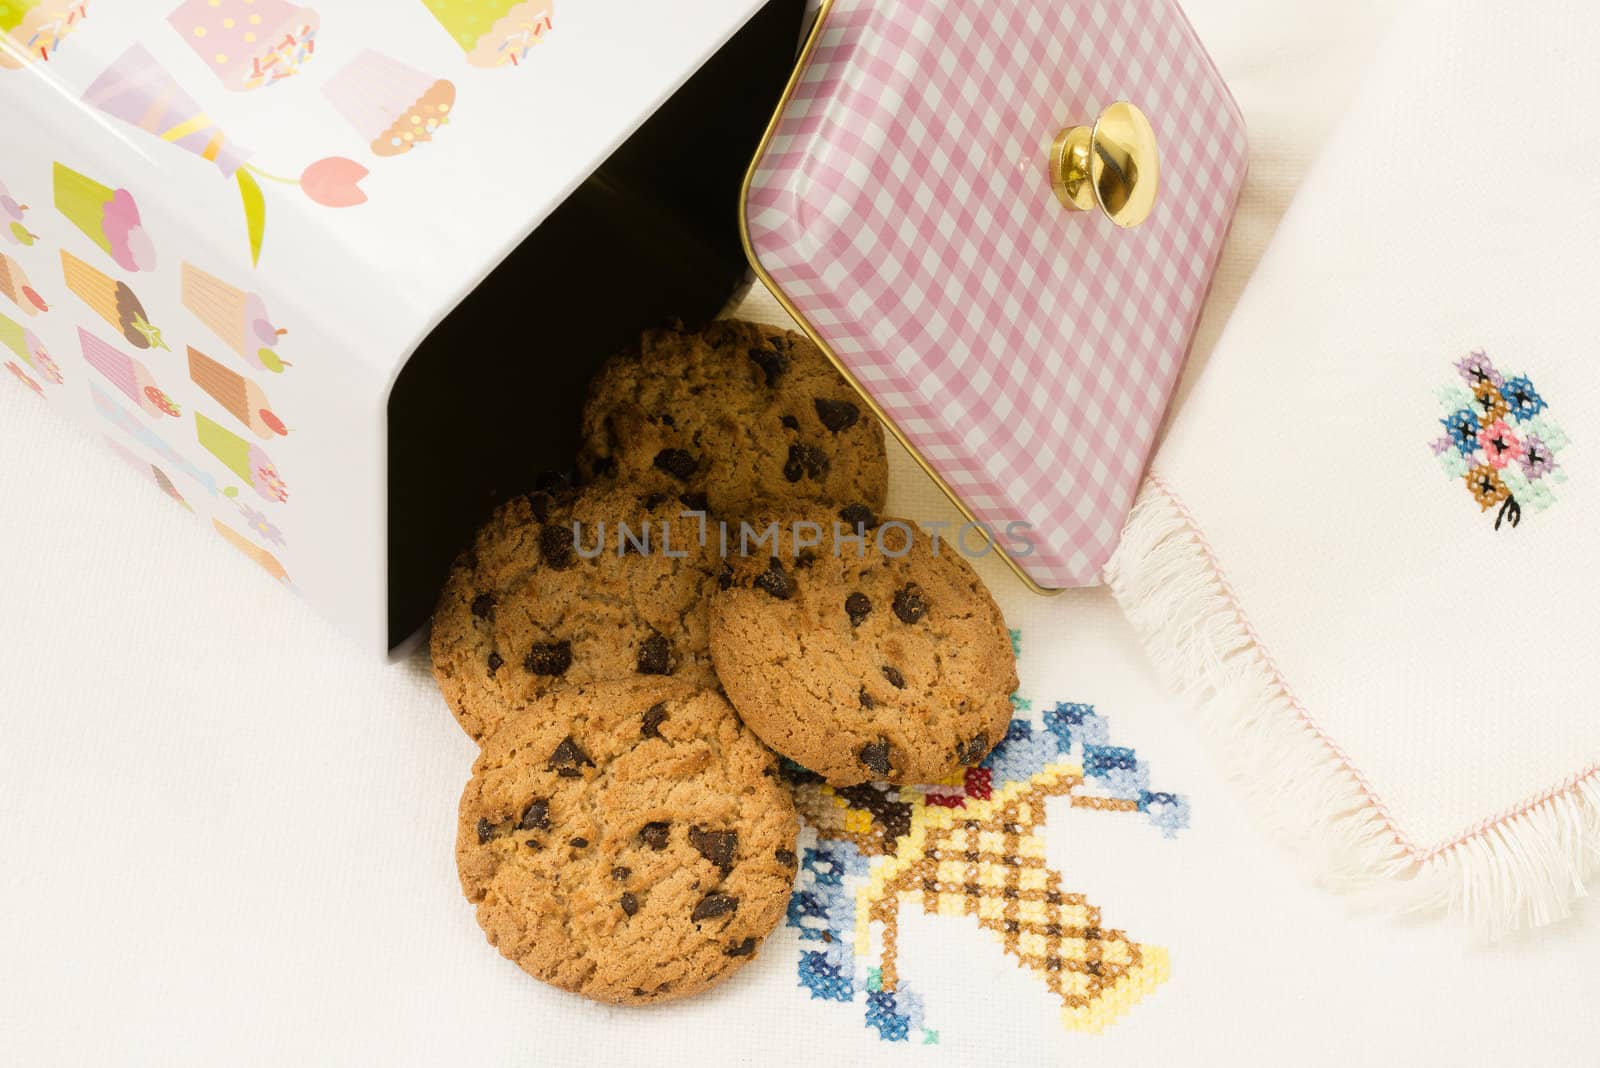 Fresh homemade chocolate chip cookies by Carche